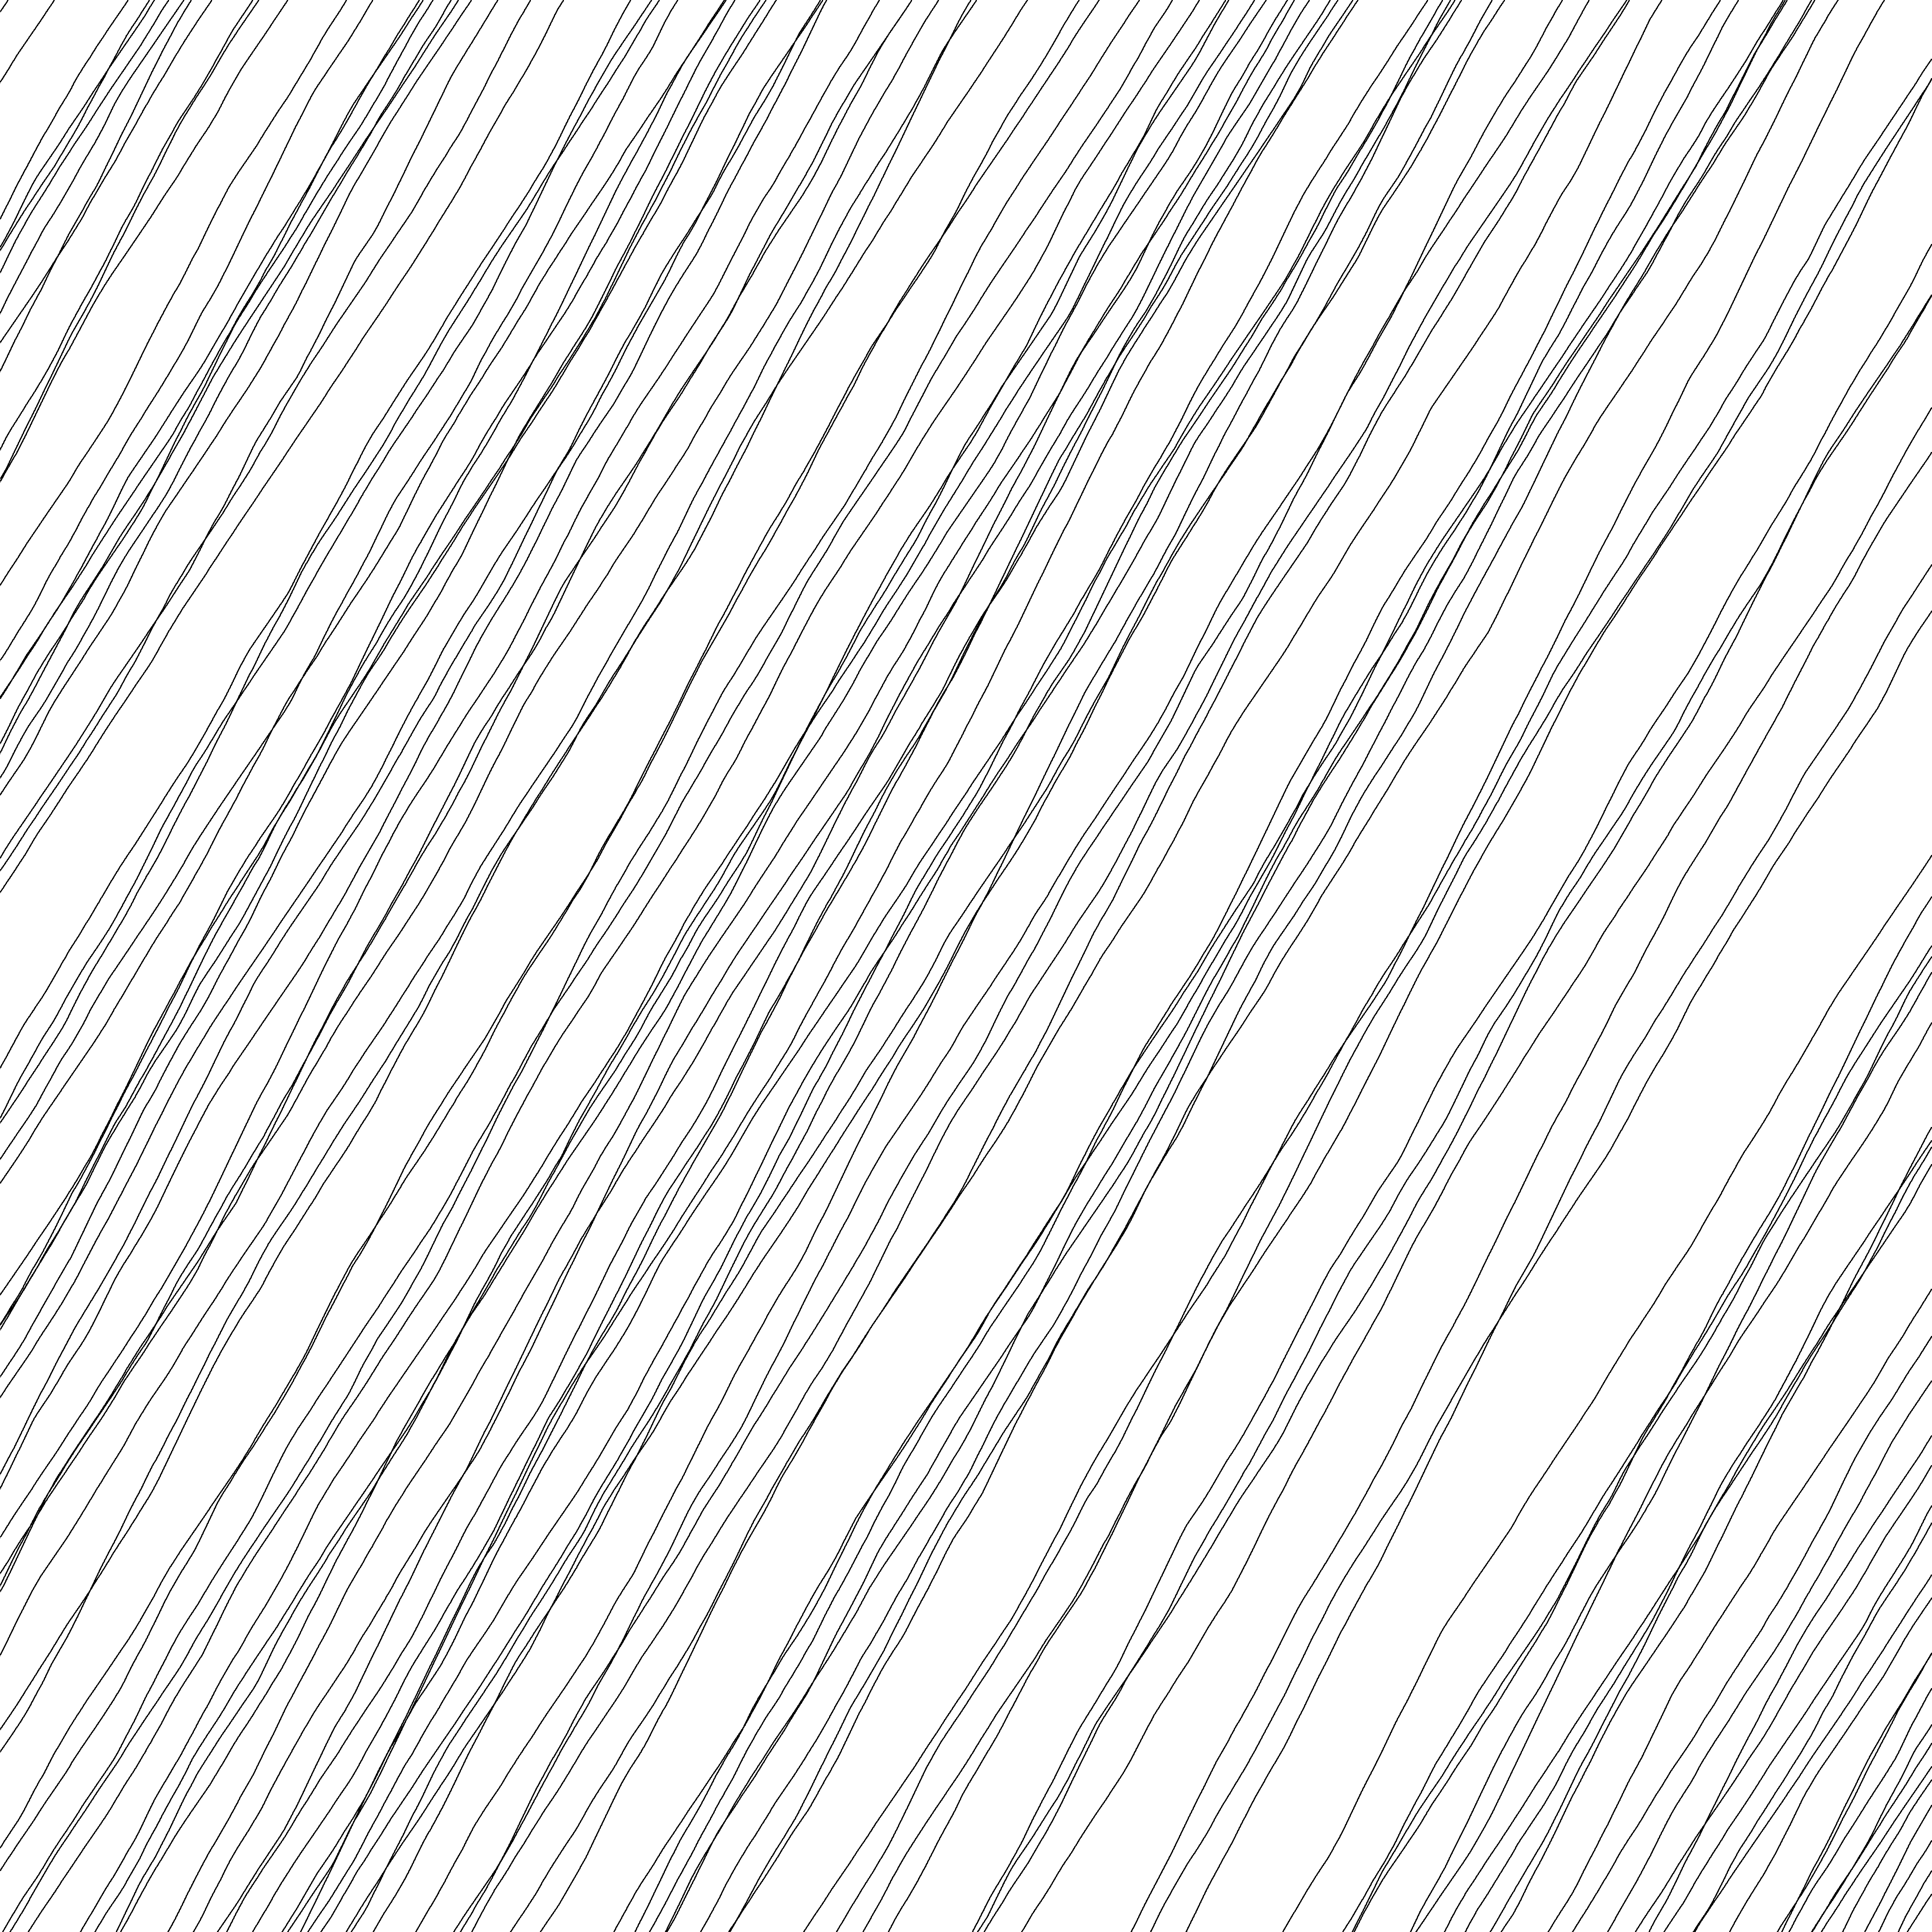 line texture png